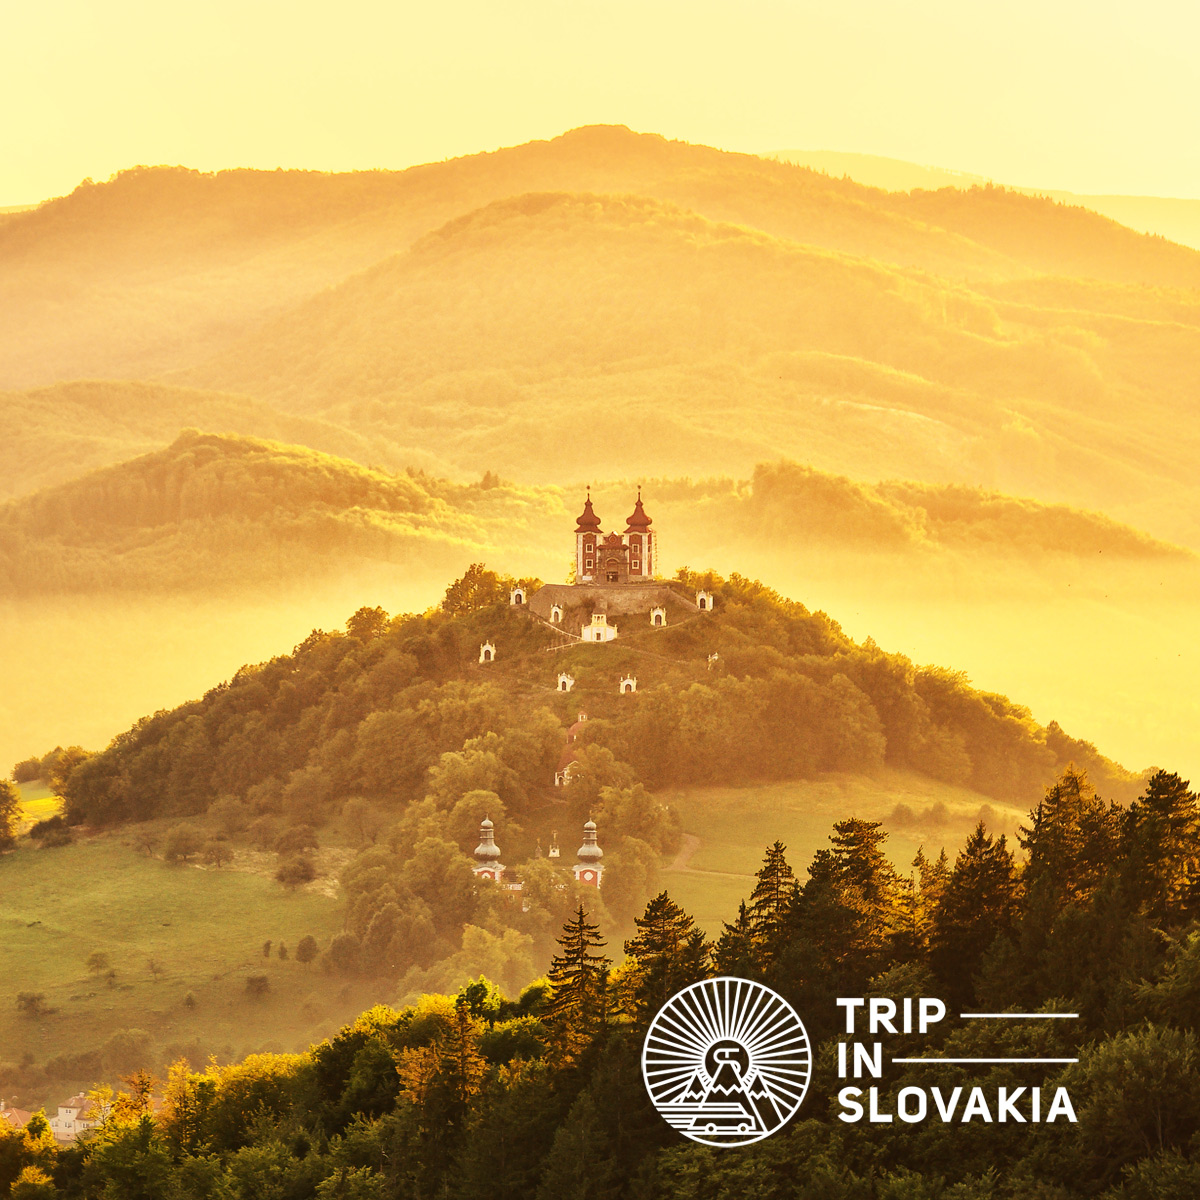 Guided tours & excursions in Slovakia